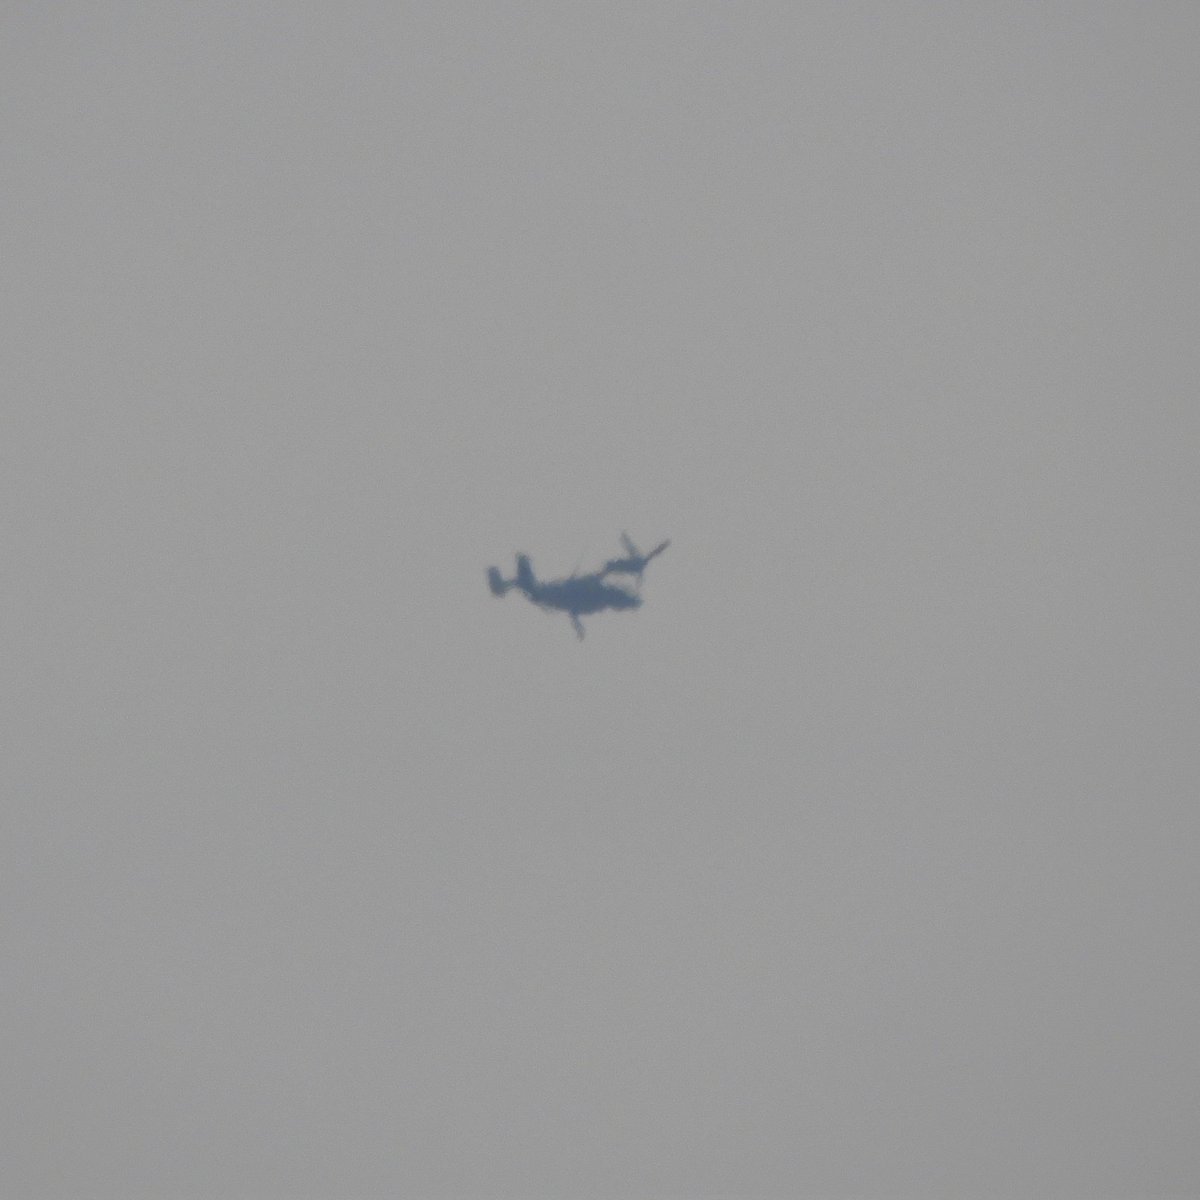 Low quality, but nice to see an Osprey over OC again! #RUDY73 #V22 #VRM30 #NZY